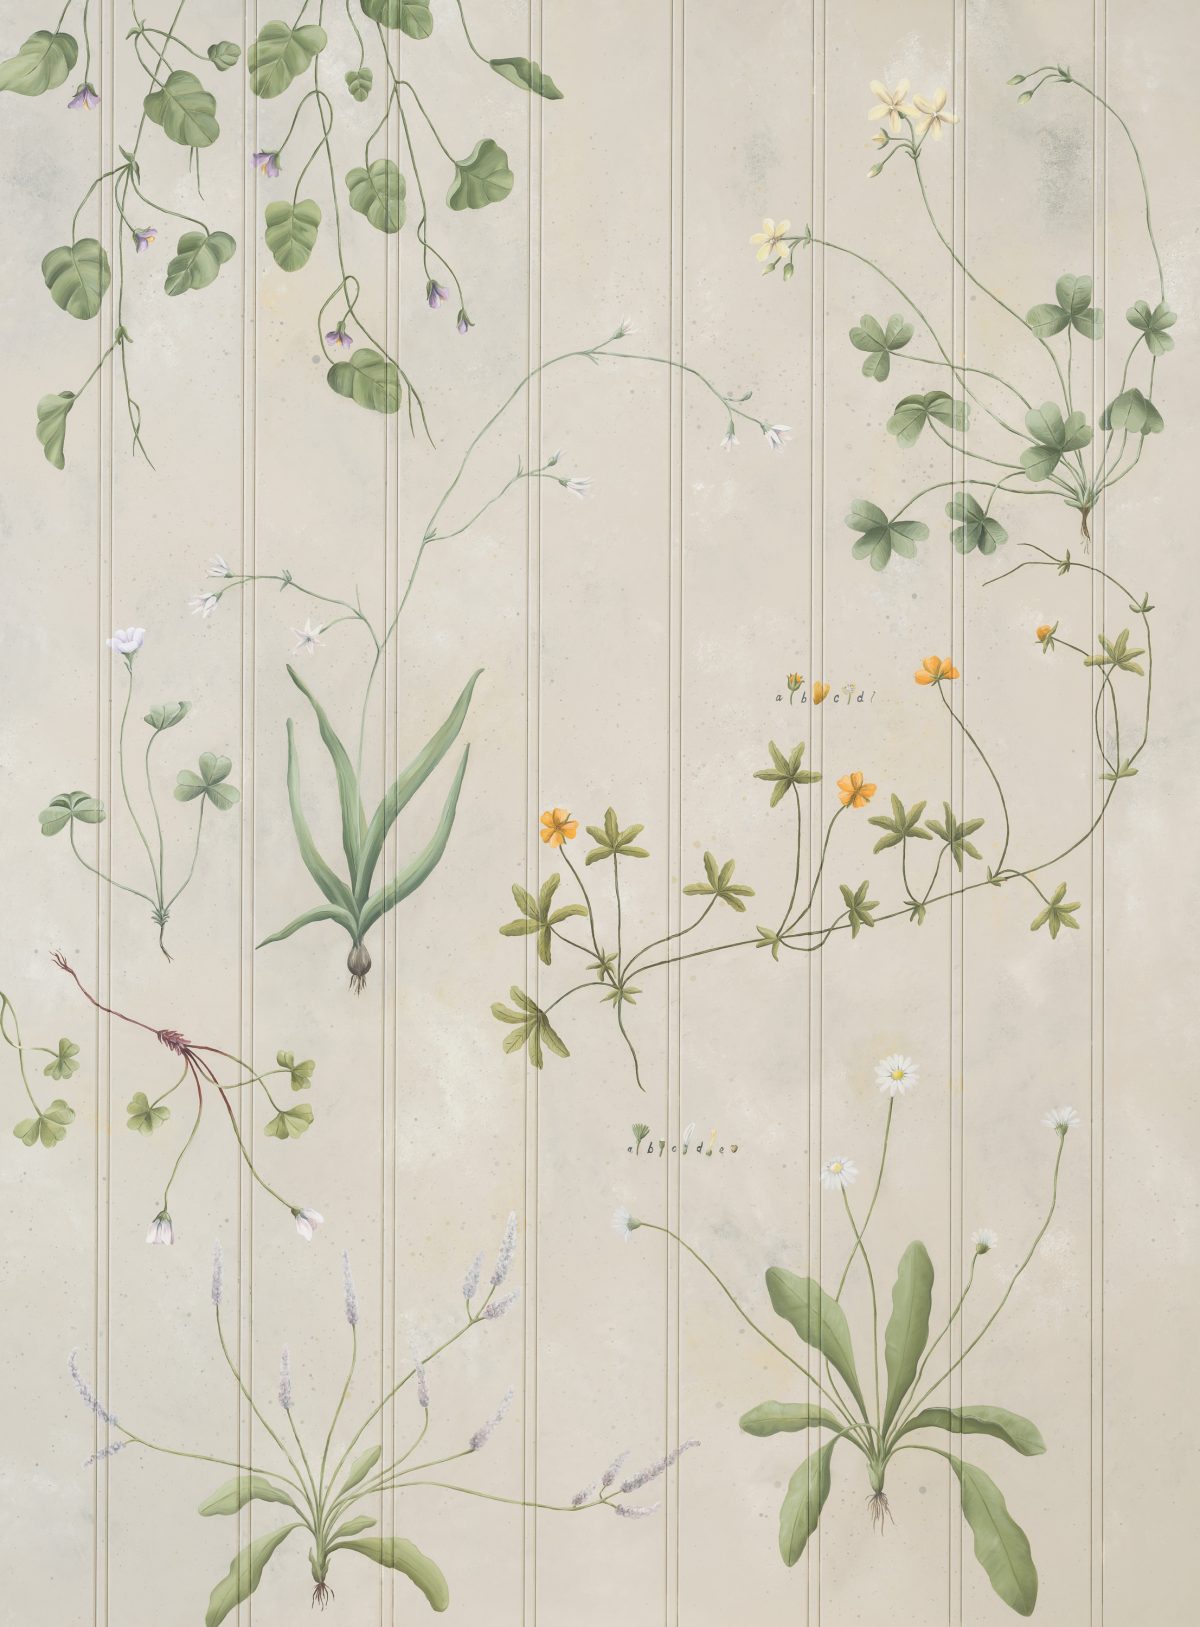 'Wild Flowers' is the most delicate and understated of all our designs. 